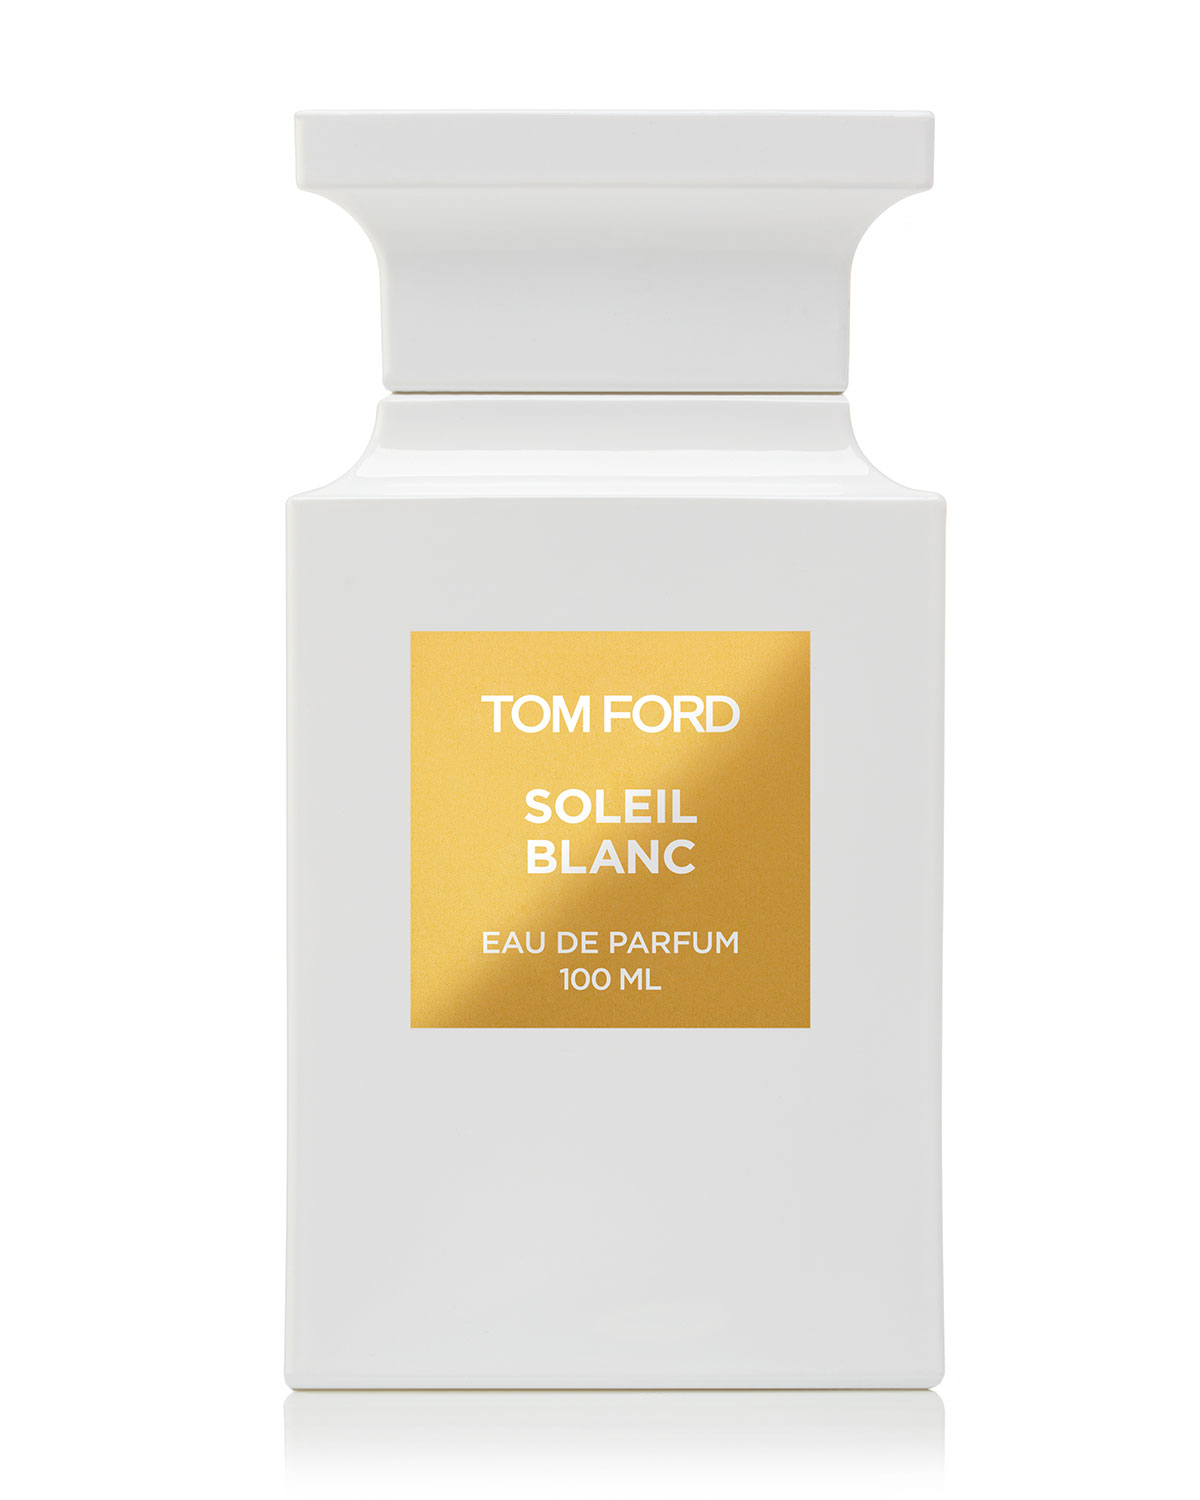 Soleil Blanc Tom Ford perfume - a new fragrance for women and men 2016